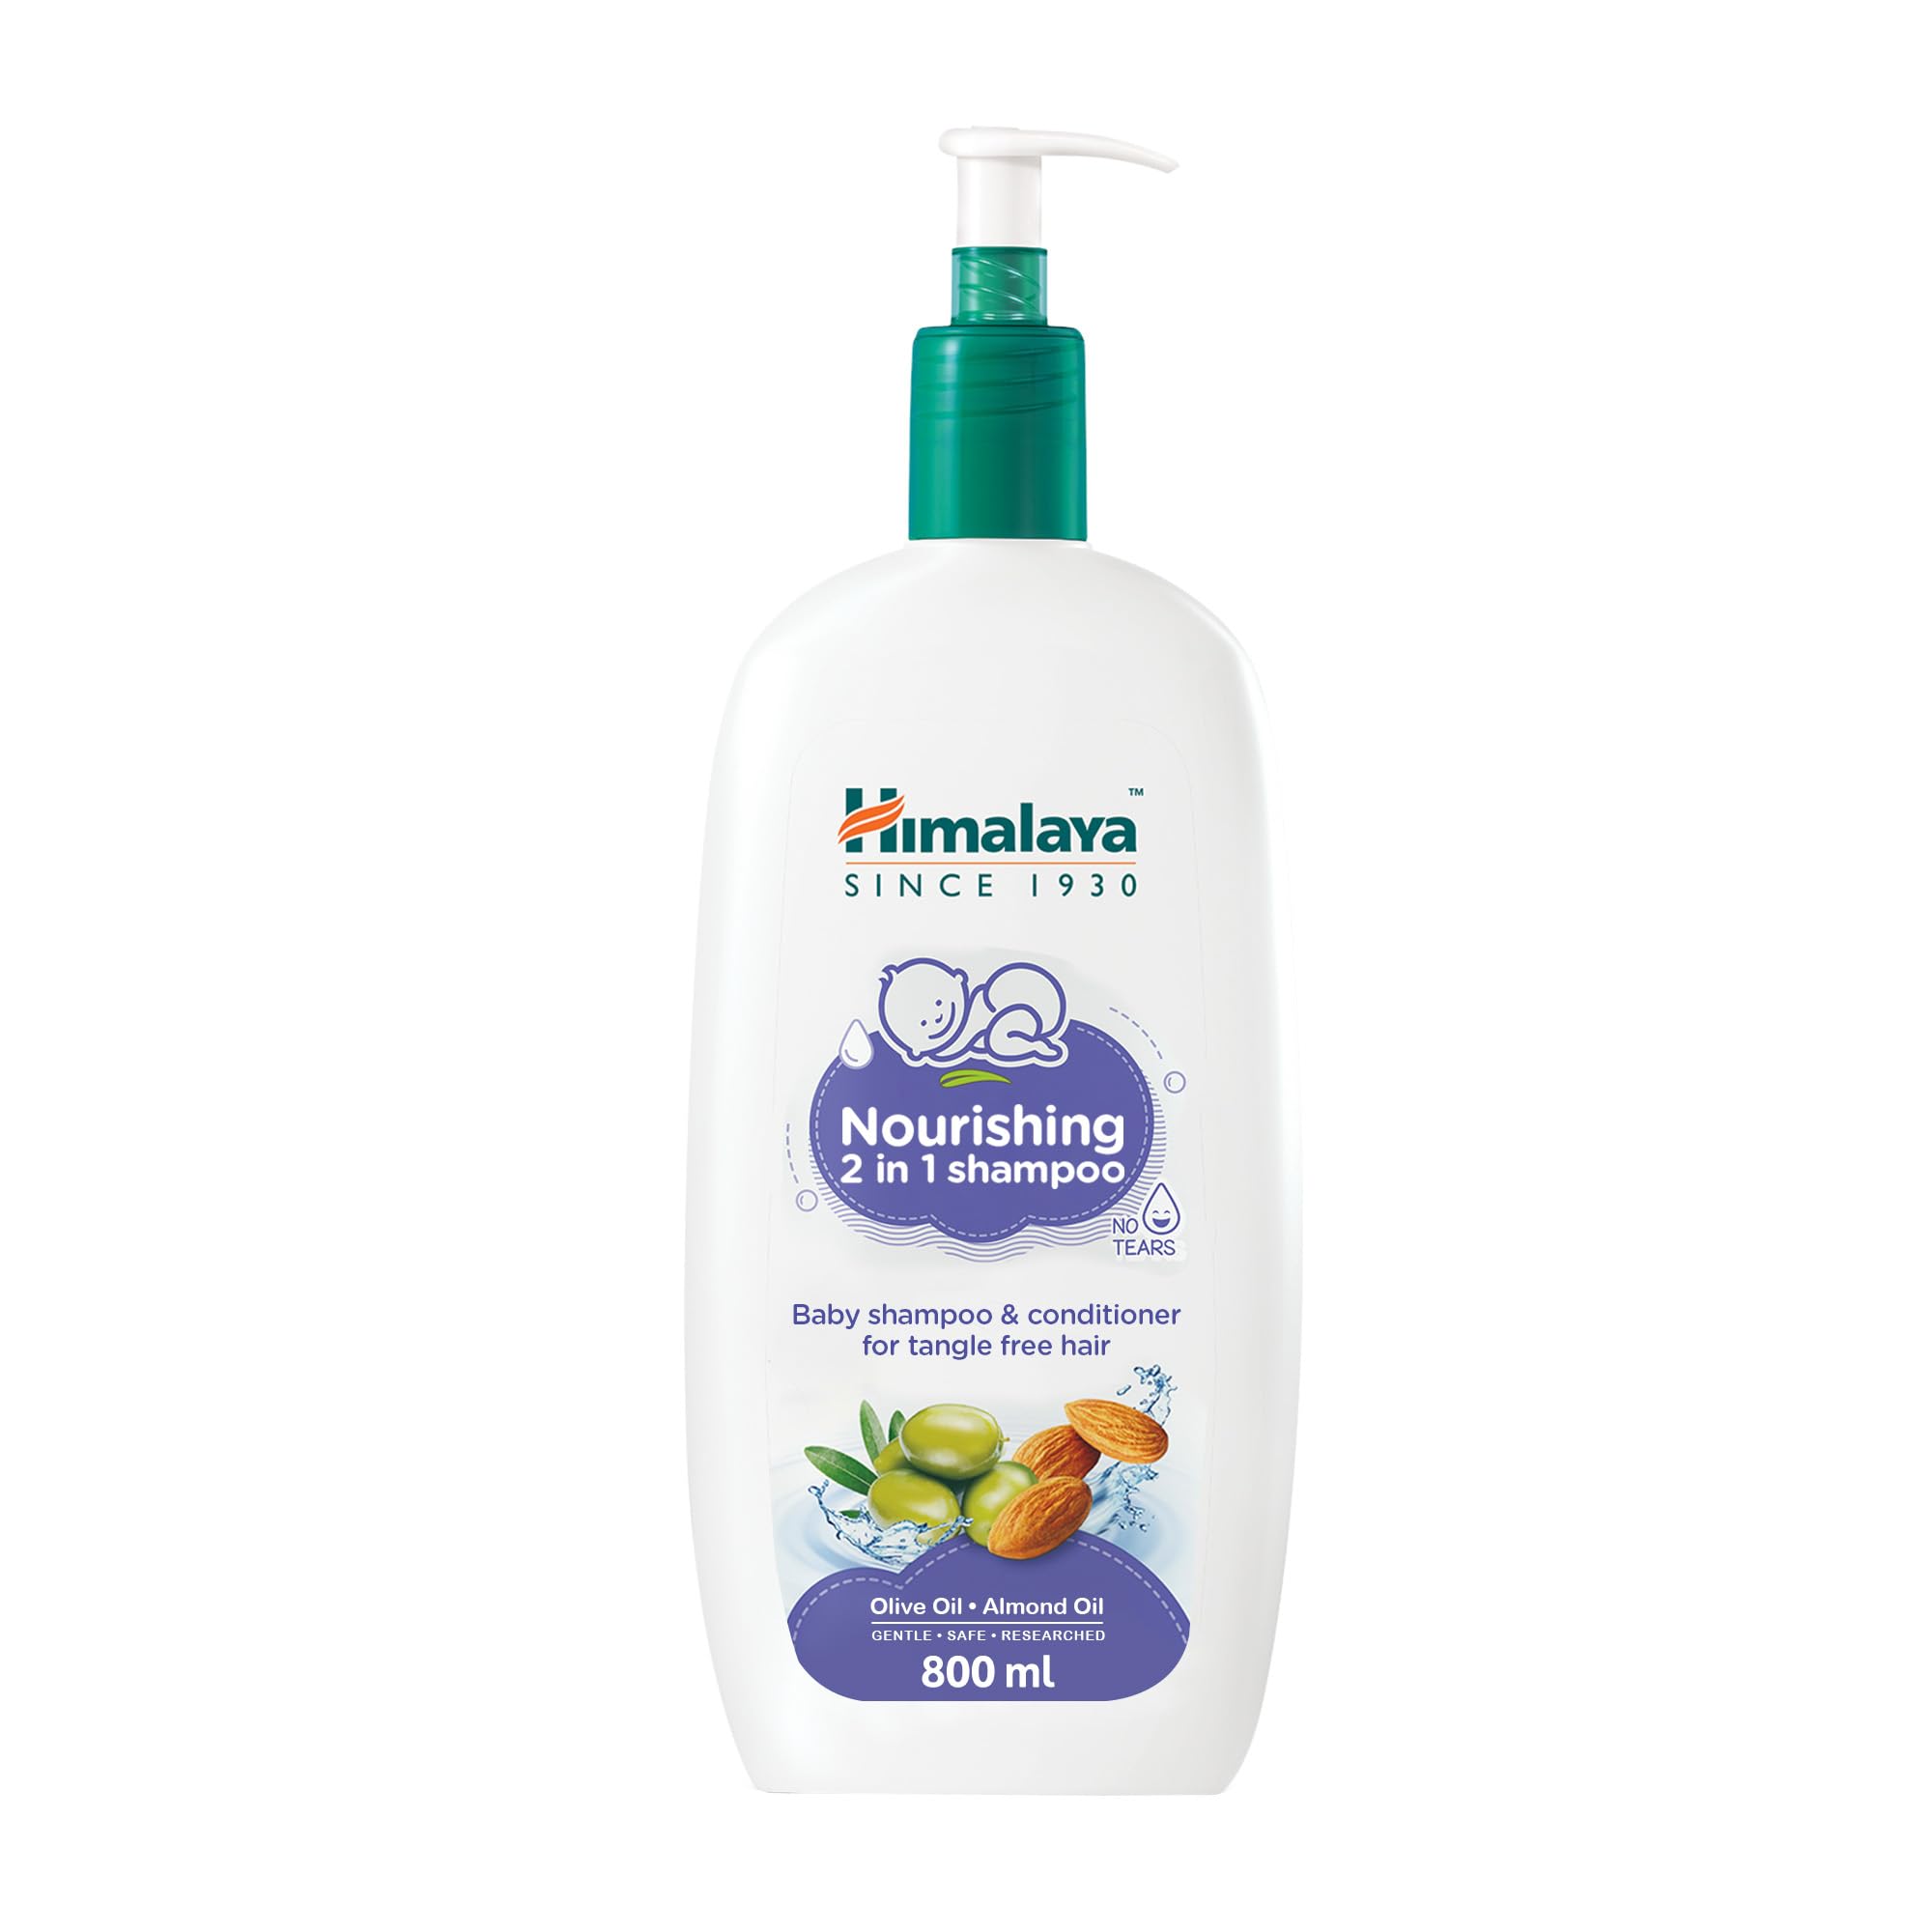 Himalaya No Tears 2in1 Nourishing Baby Shampoo & Conditioner with Olive & Almond Oils for Deeply Moisturized and Tangle-Free Hair, pH Balanced, Free from Alcohol, Parabens & Sulphates- 800ml